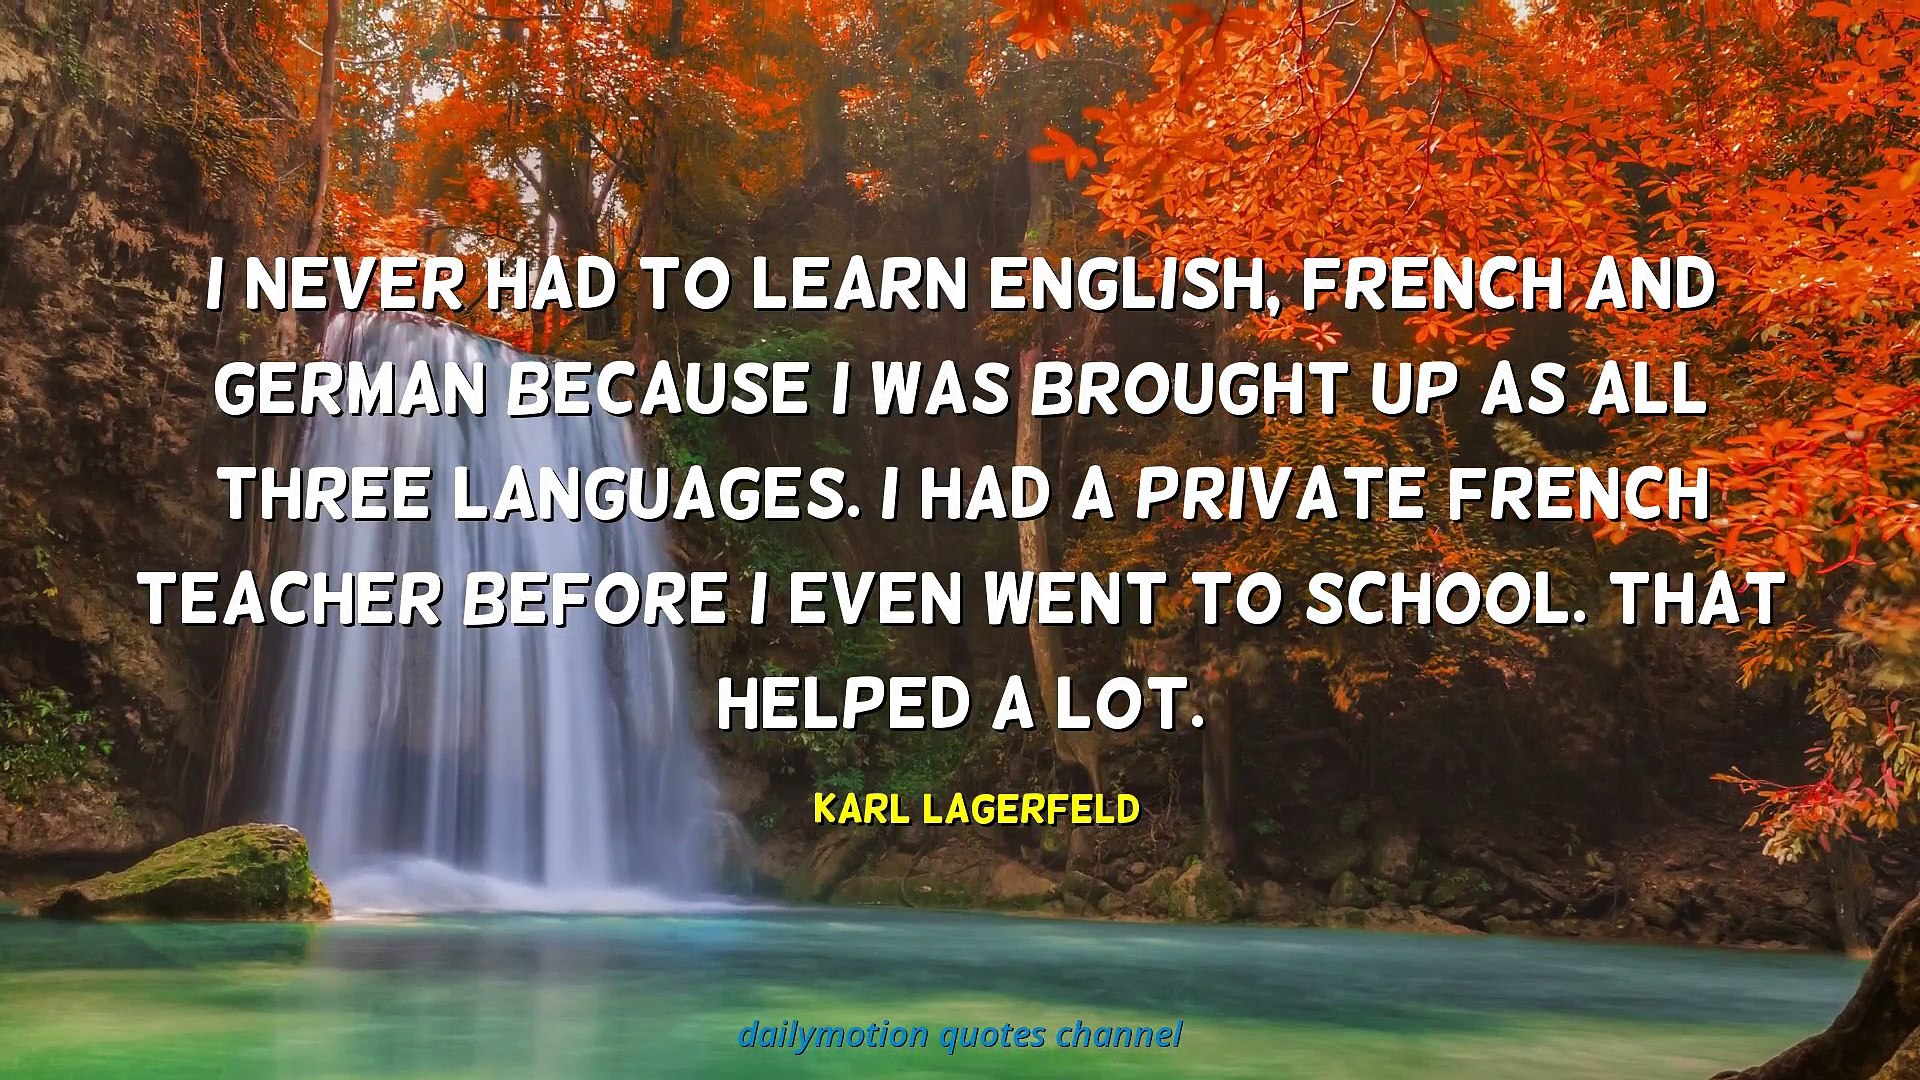 Karl Lagerfeld Quotes #3